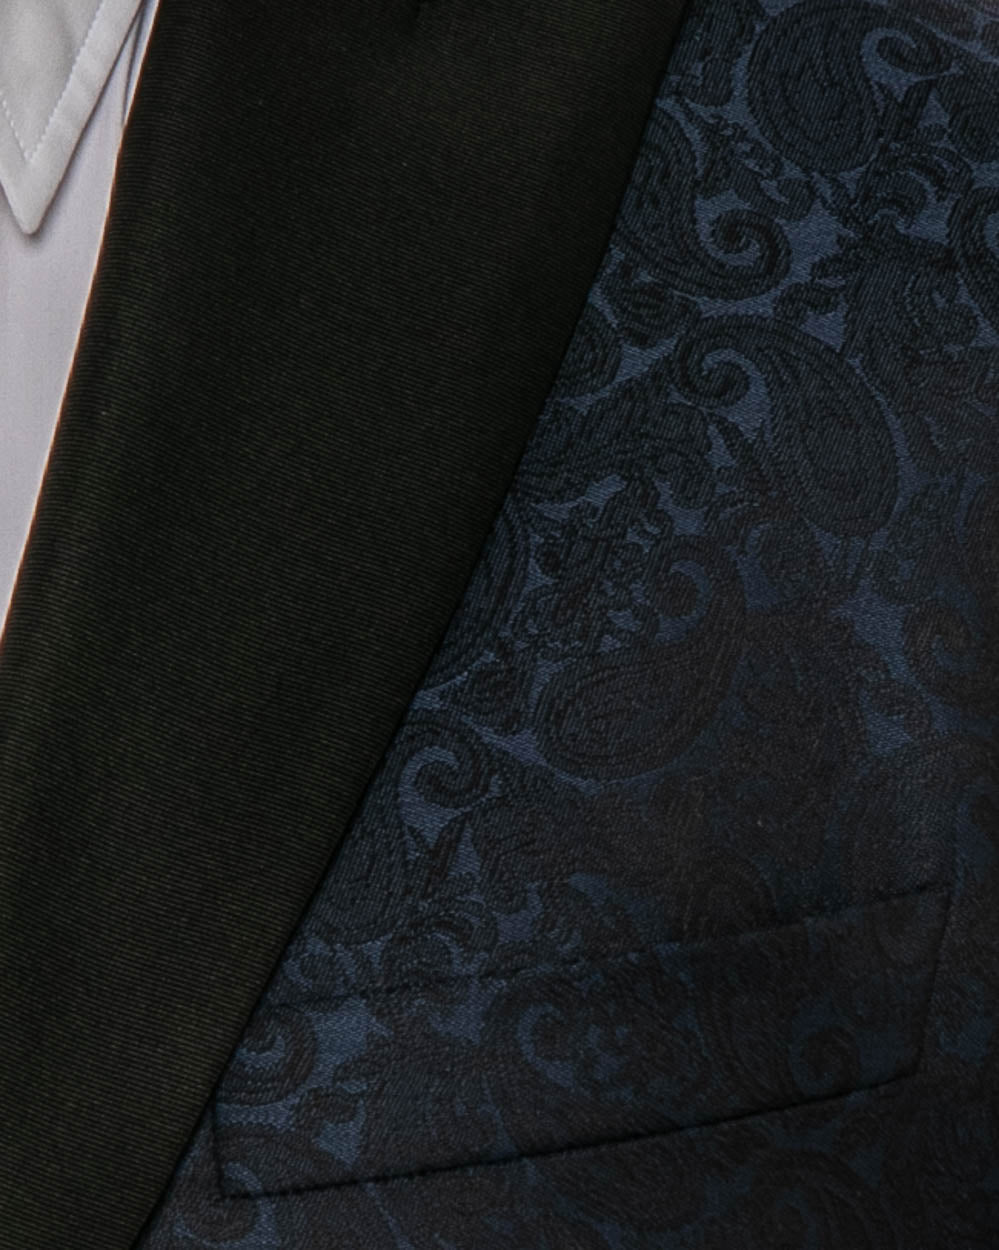 Navy and Black Paisley Dinner Jacket